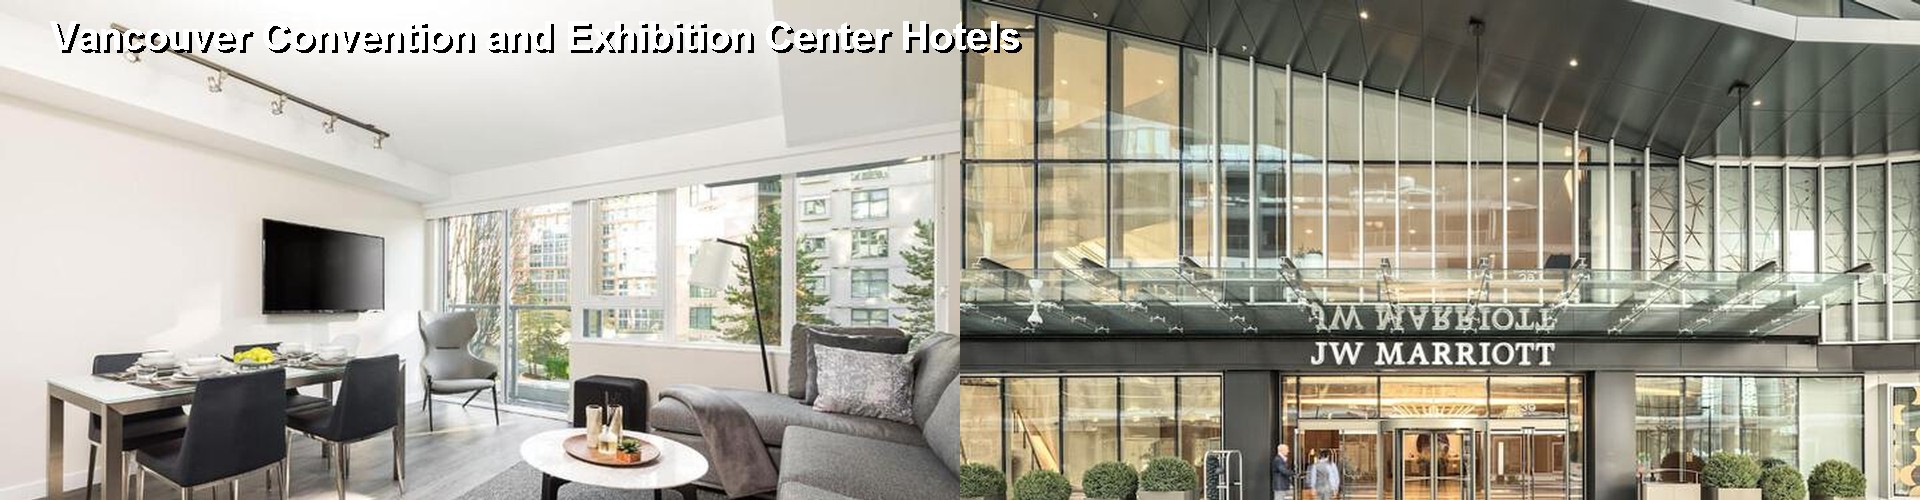 5 Best Hotels near Vancouver Convention and Exhibition Center